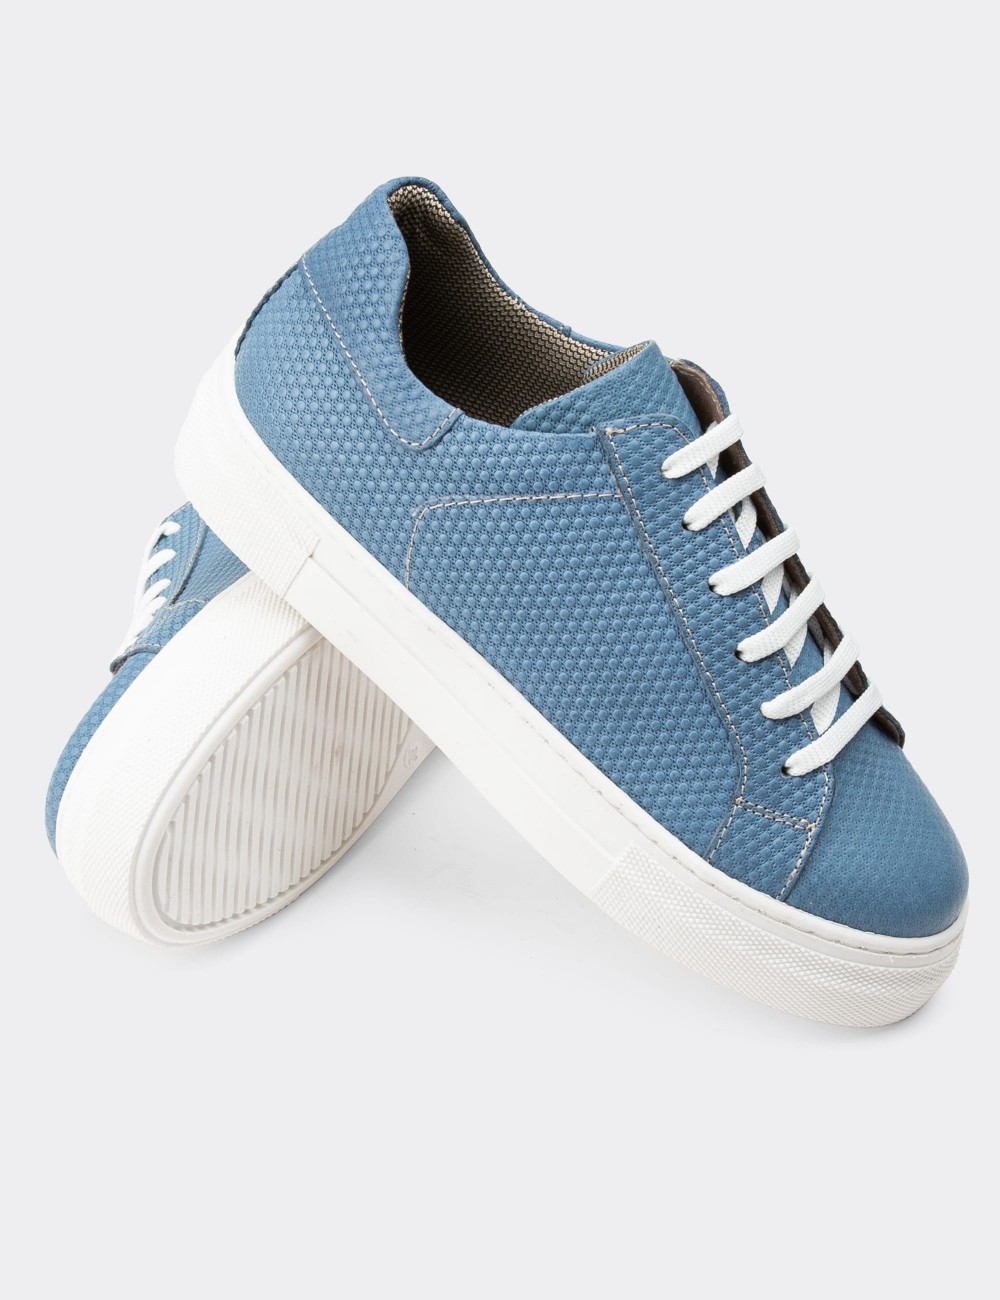 Janes Vans Aken|women's Canvas Oxfords - Spring/autumn Lace-up Casual  Sneakers